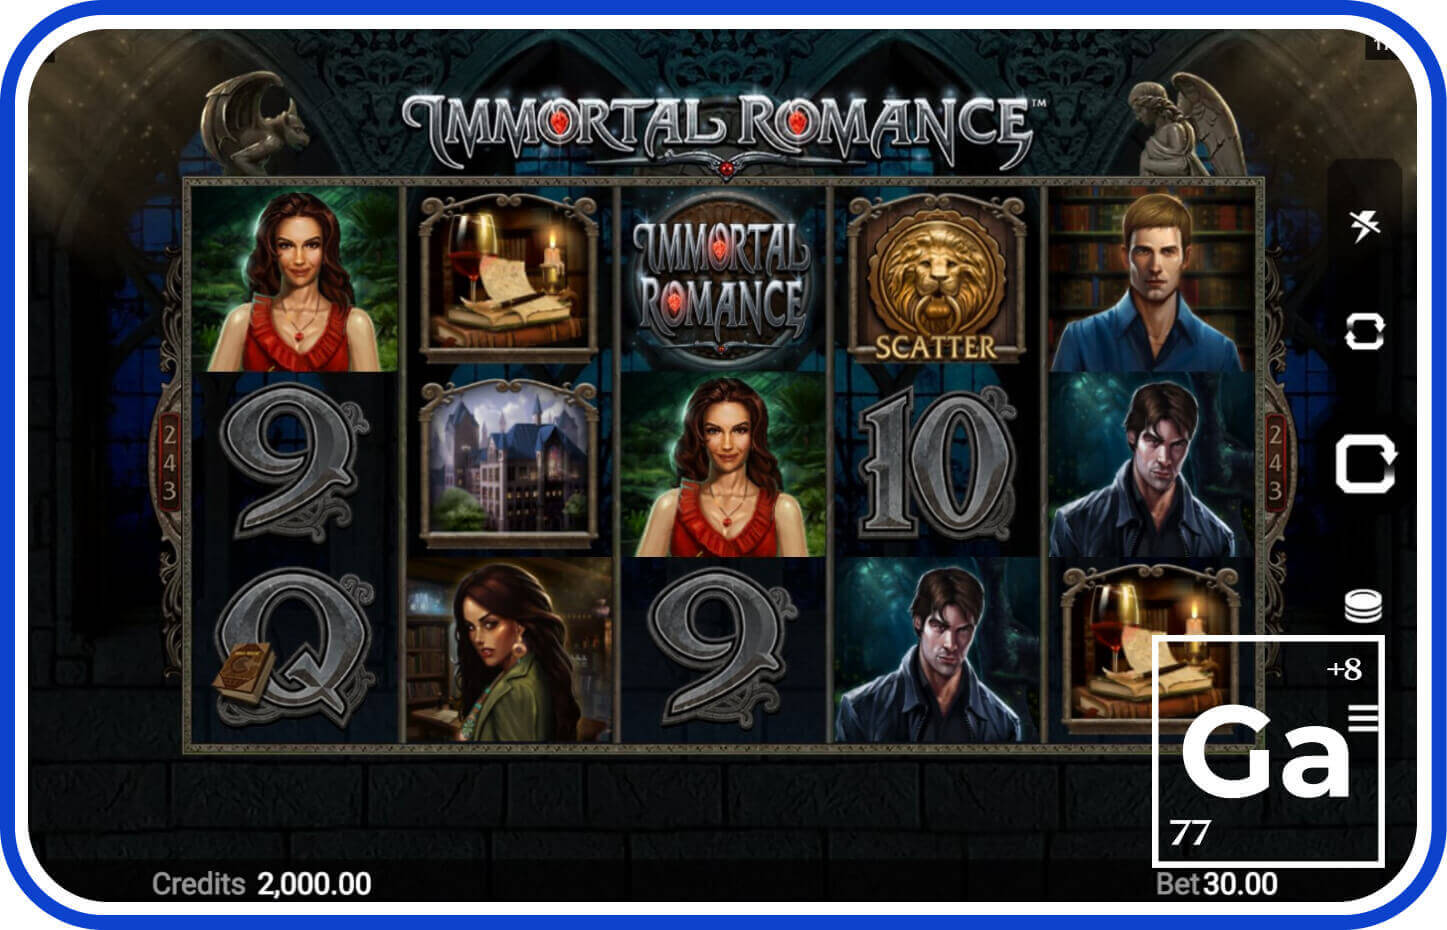 Immortal Romance slot by Microgaming